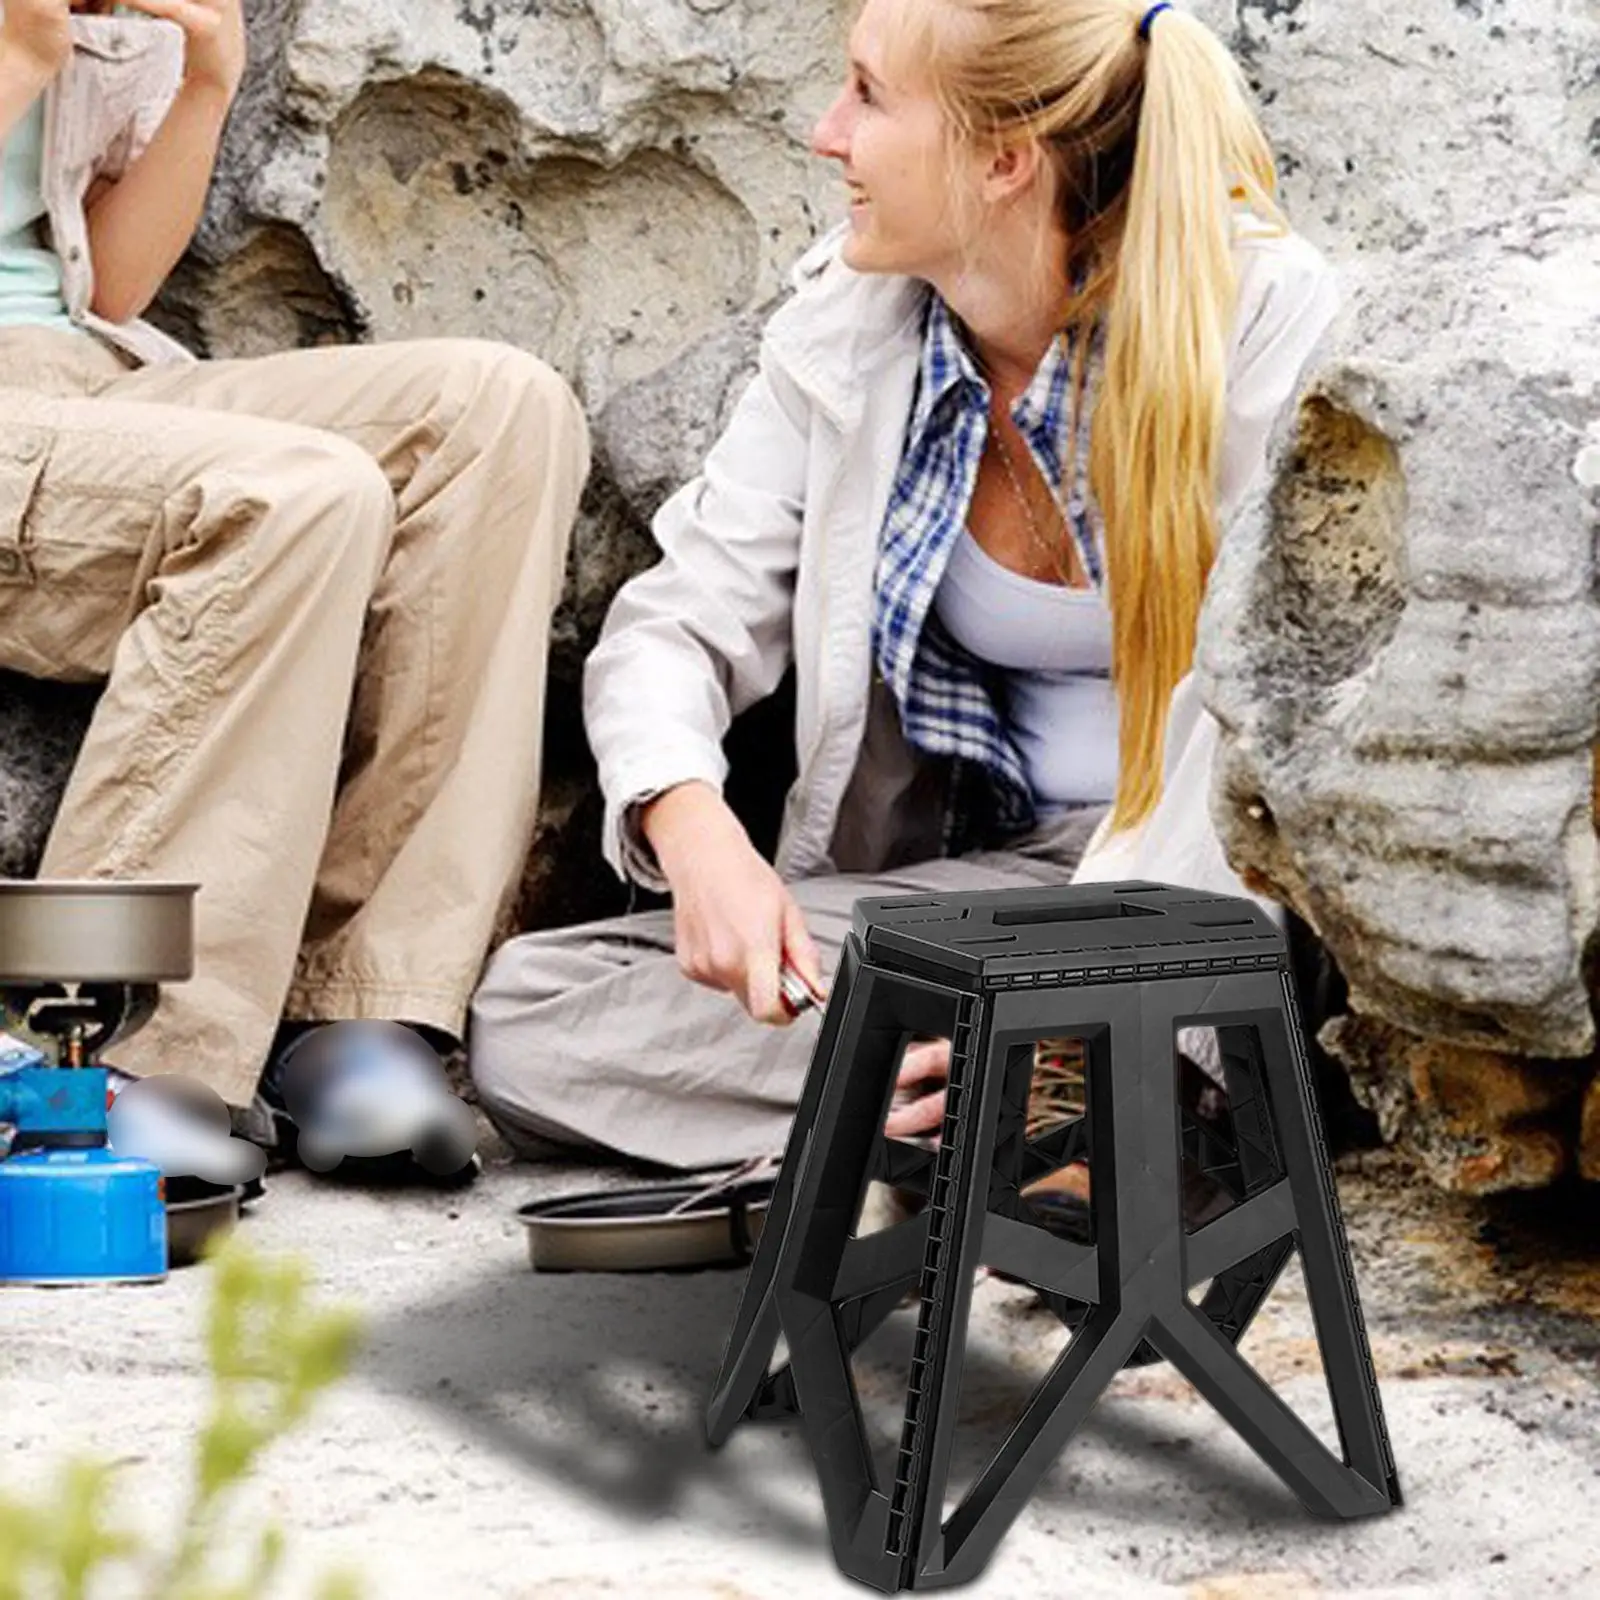 Collapsible Folding Stool Camping Chair Plastic Heavy Duty Furniture Footstool for Garden Hunting Adults Fishing Backpacking